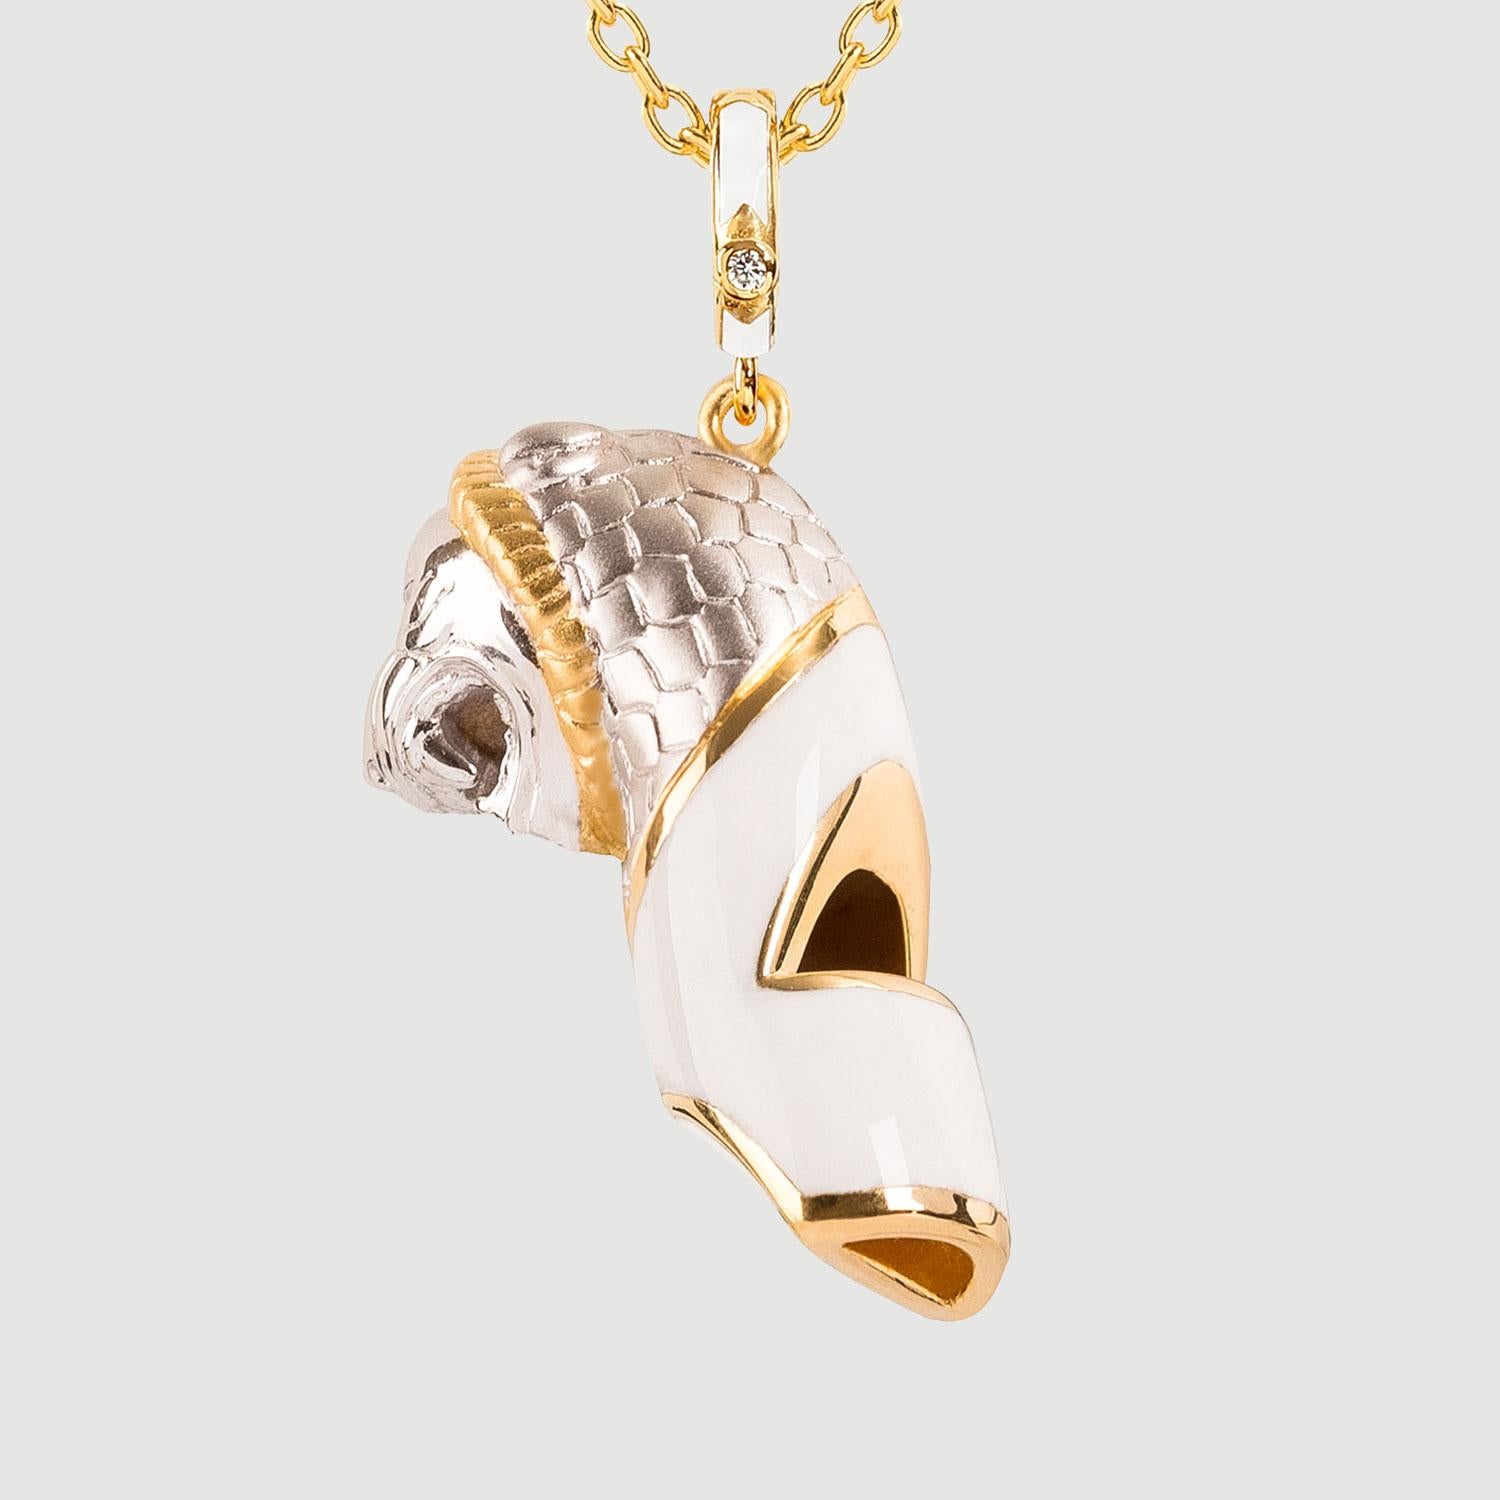 Introducing our exquisite Gold Vermeil Lion of Babylon Whistle Pendant Necklace - a modern twist on the classic antique dog whistle. This beautiful piece is not only a stunning jewelry design, but also a fully functional whistle that produces a high